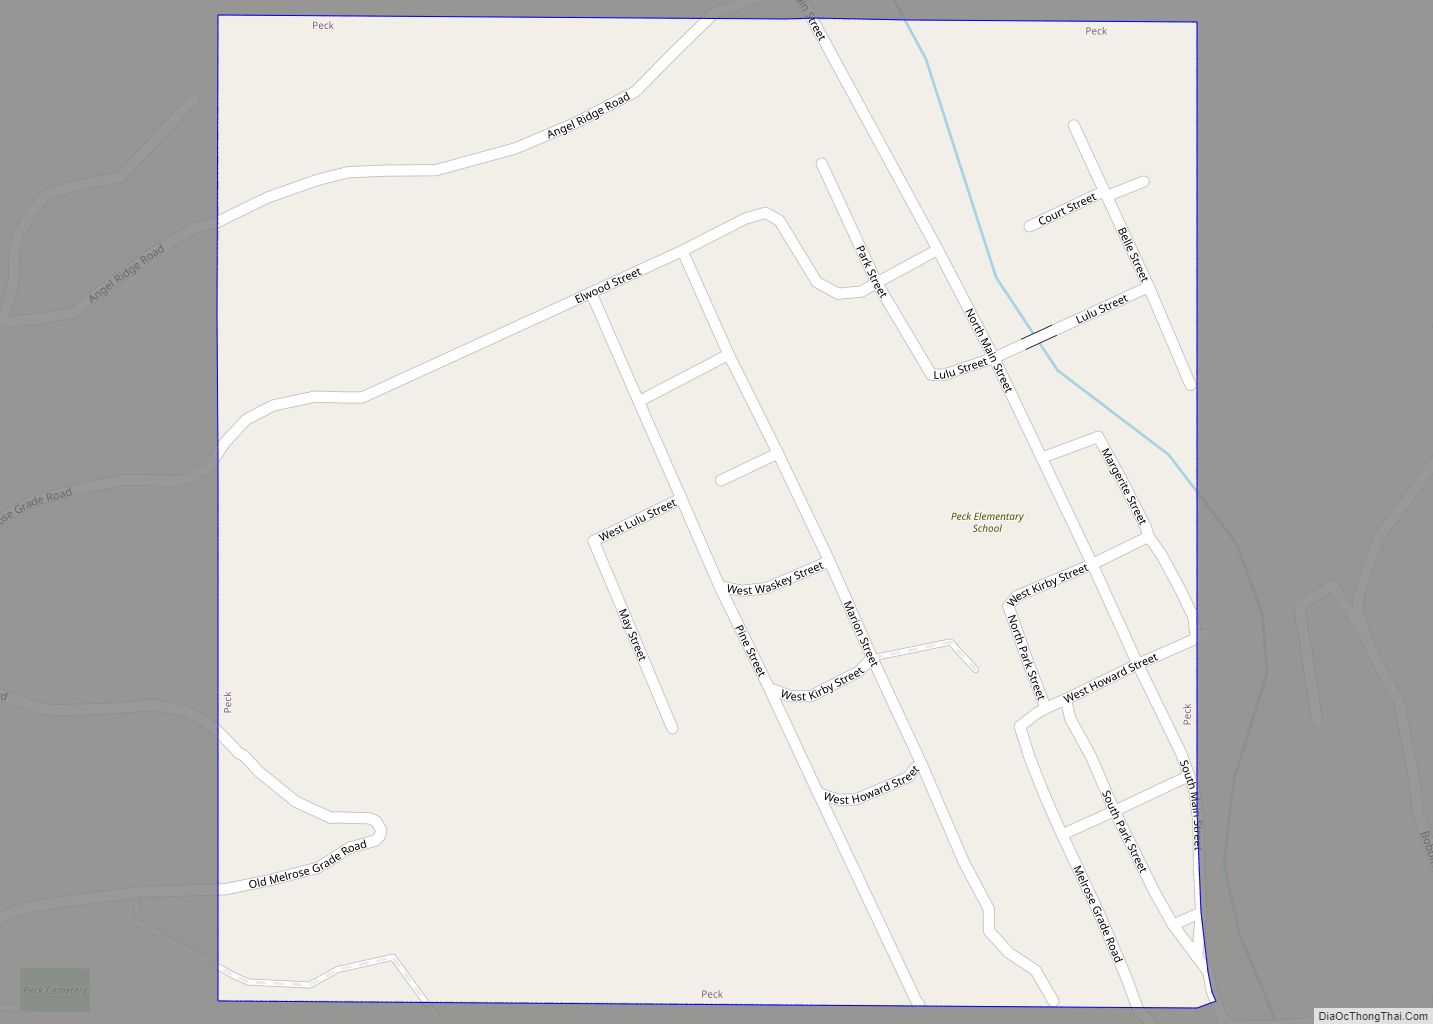 Map of Peck city